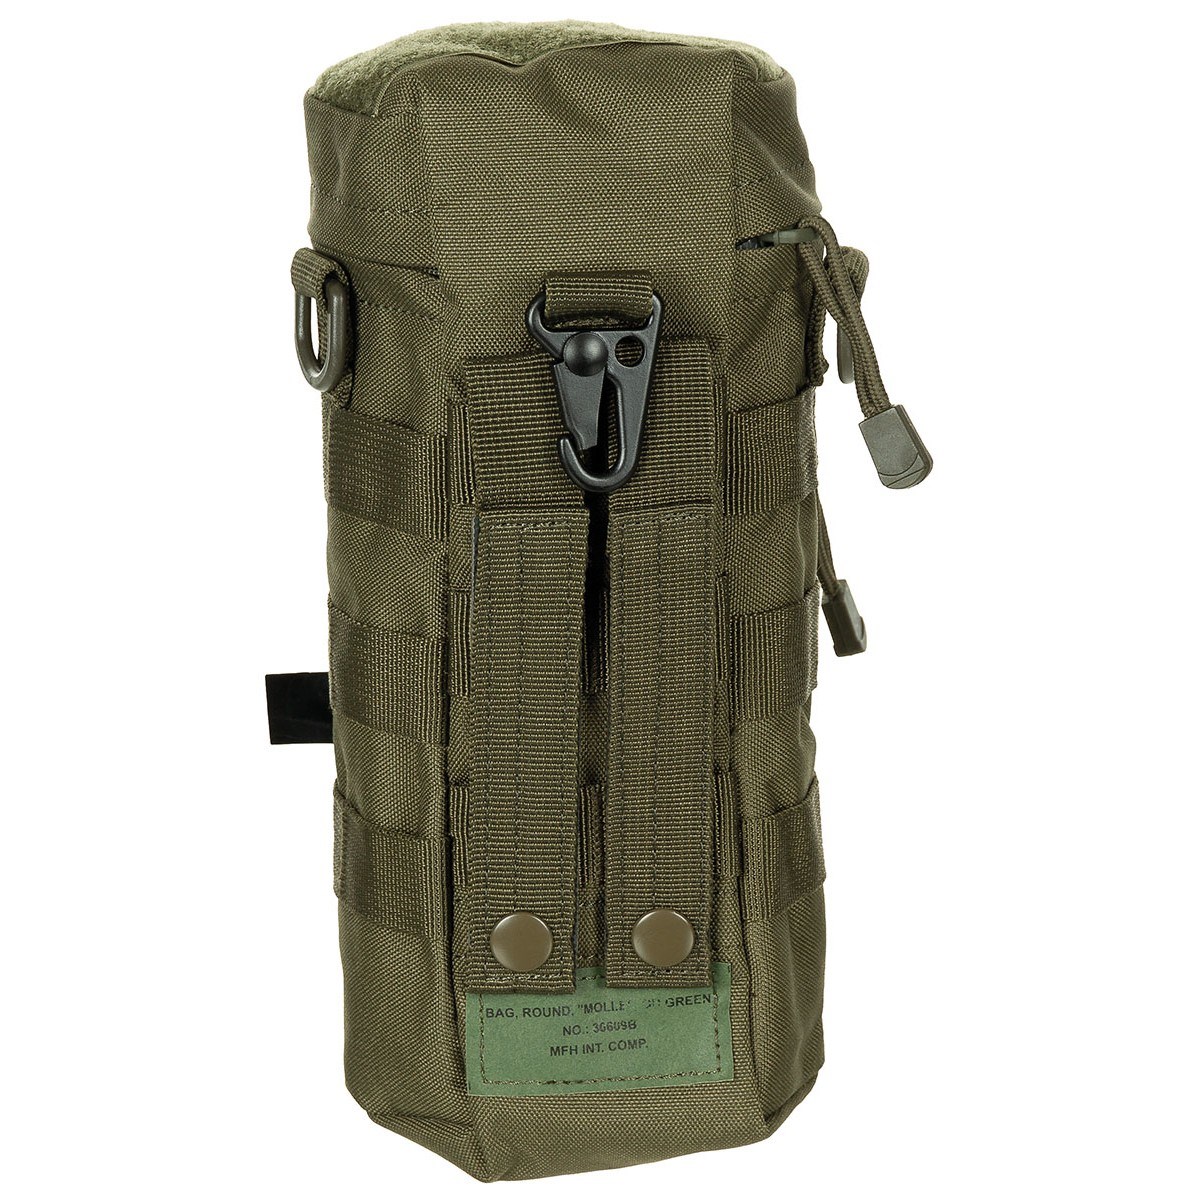 MFH int. comp. MOLLE pouch large 11 x 25 cm OLIVE